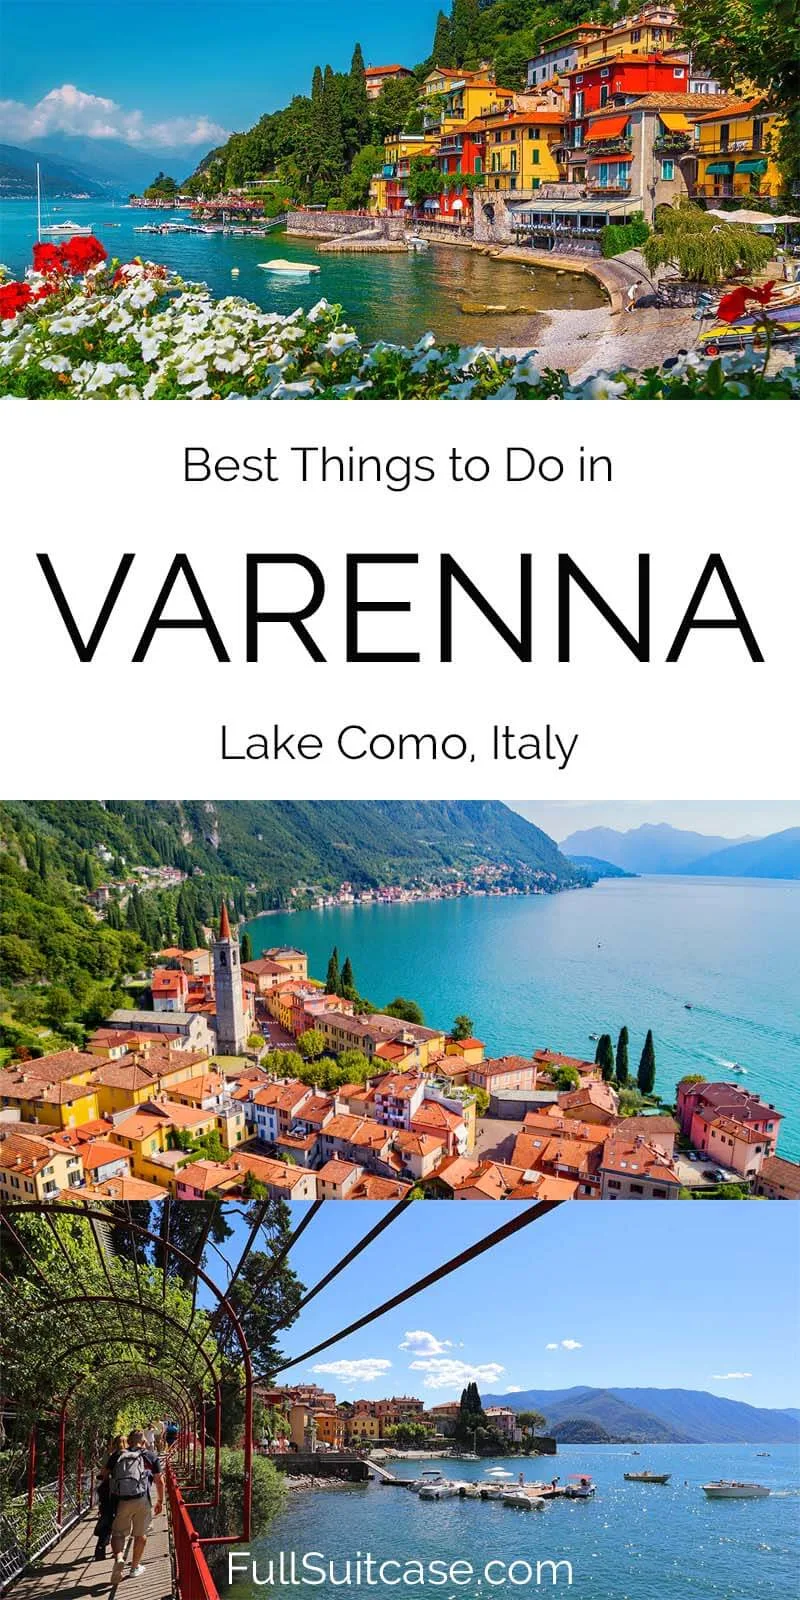 Best places to see and things to do in Varenna, Lake Como, Italy